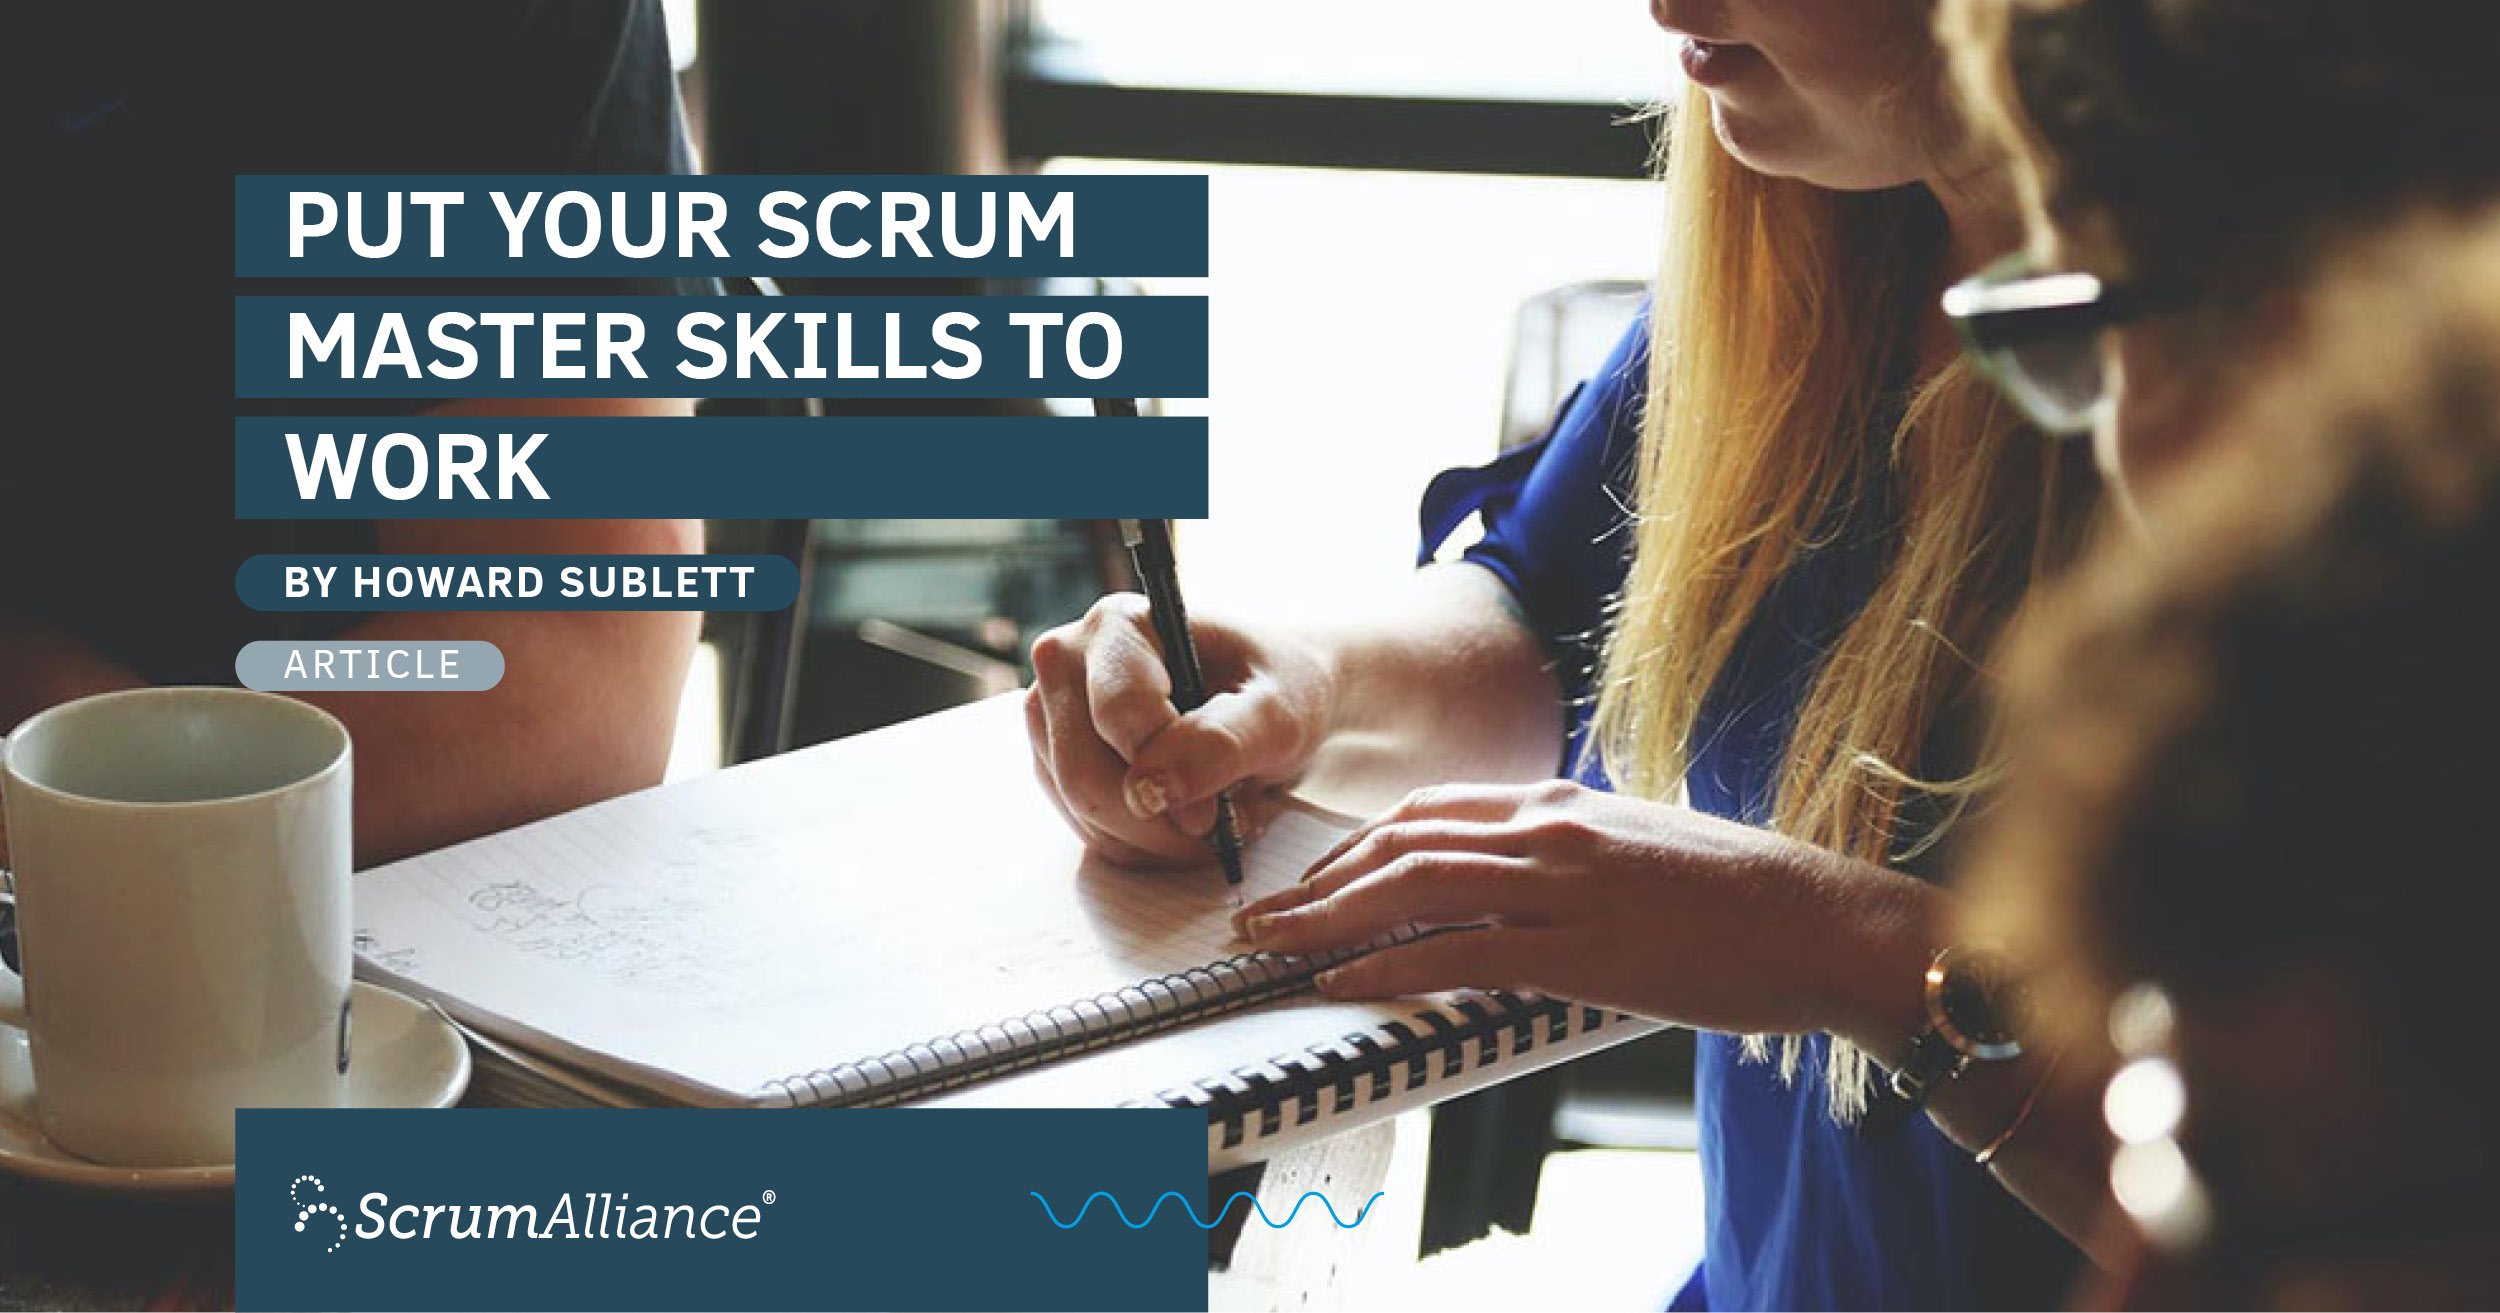 Article - Put Your Scrum Master Skills to Work